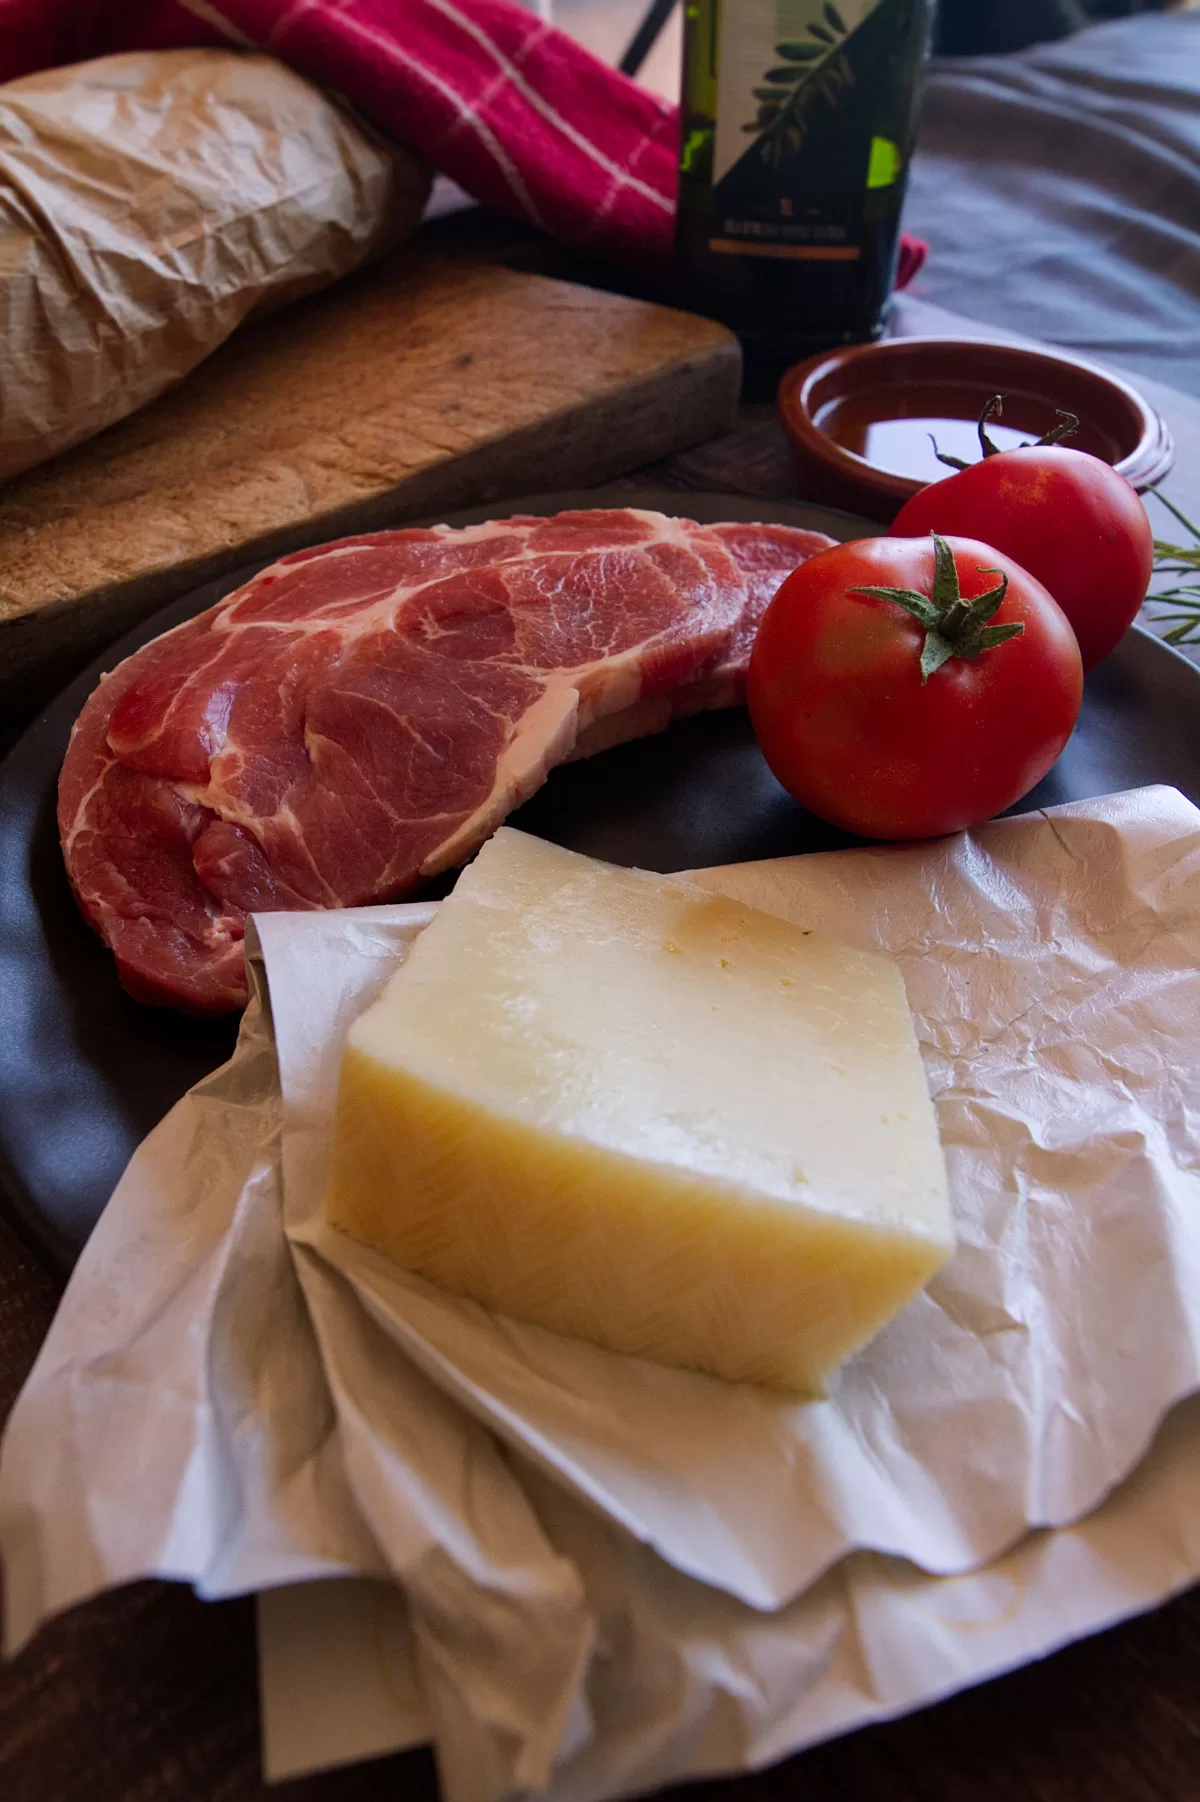 a large piece of cheese sits beside some tomatoes and slices of pork tenderloin.